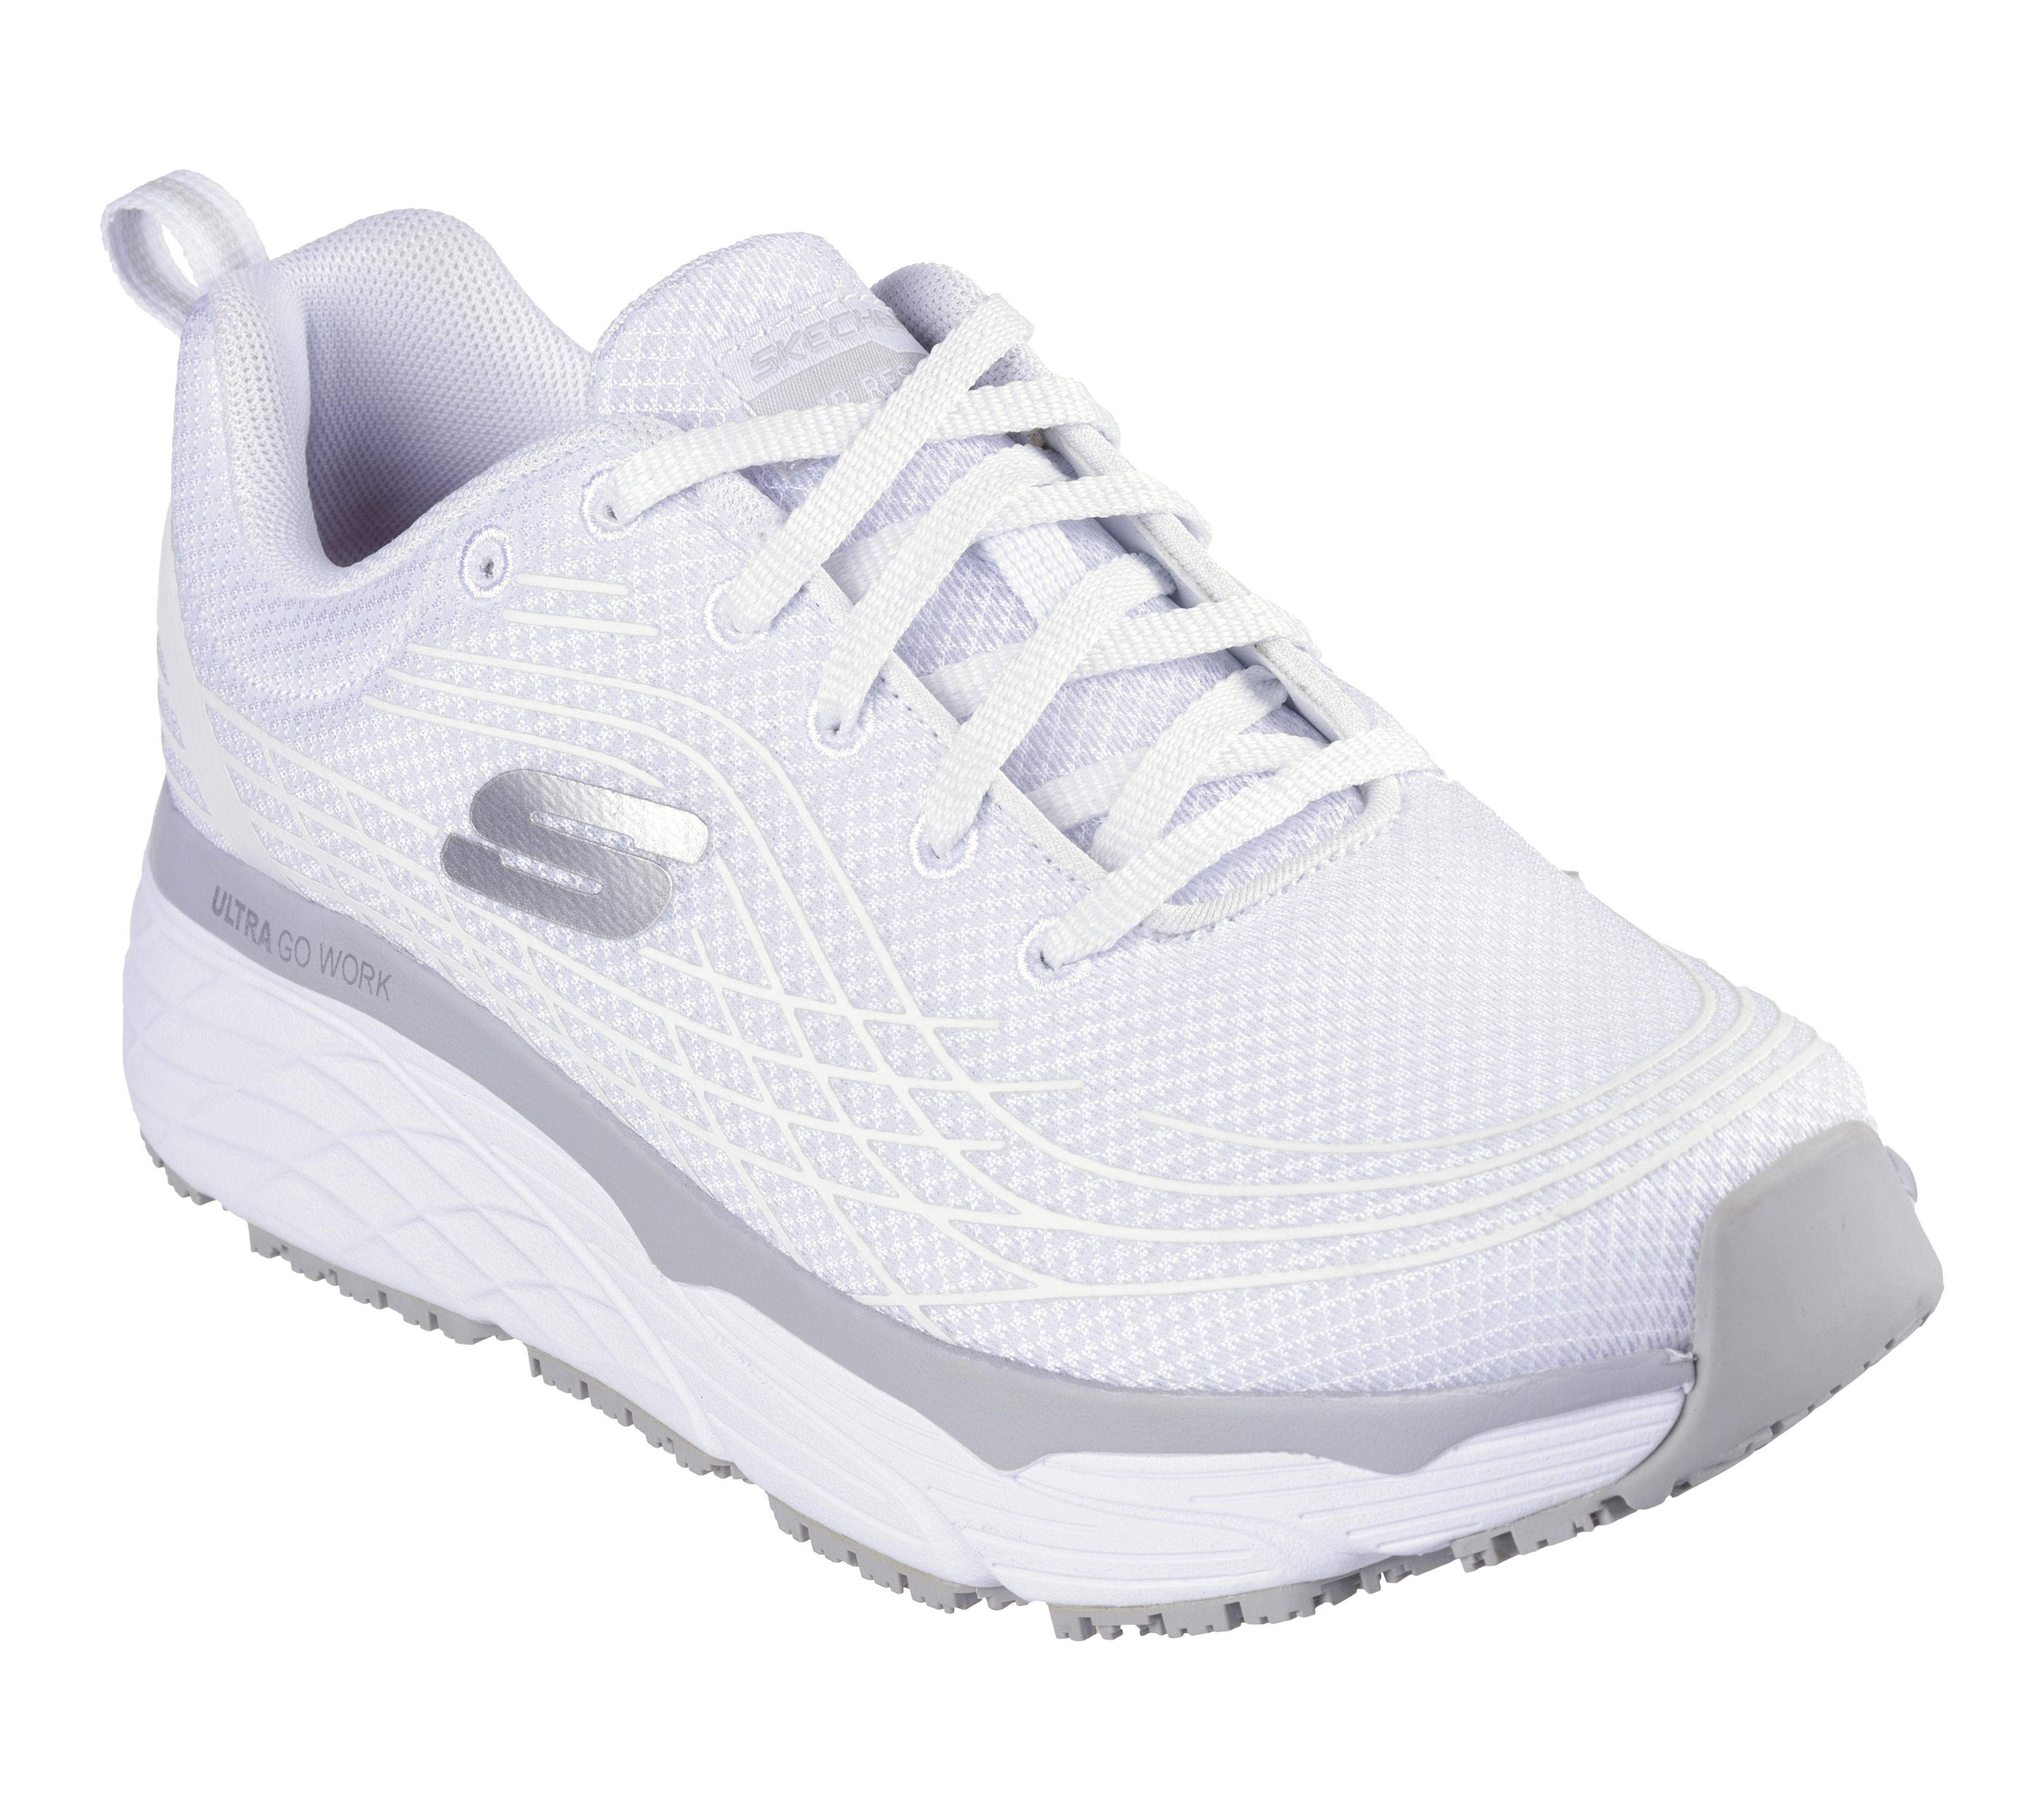 Work Relaxed Cushioning | SKECHERS Fit: Max SR Elite